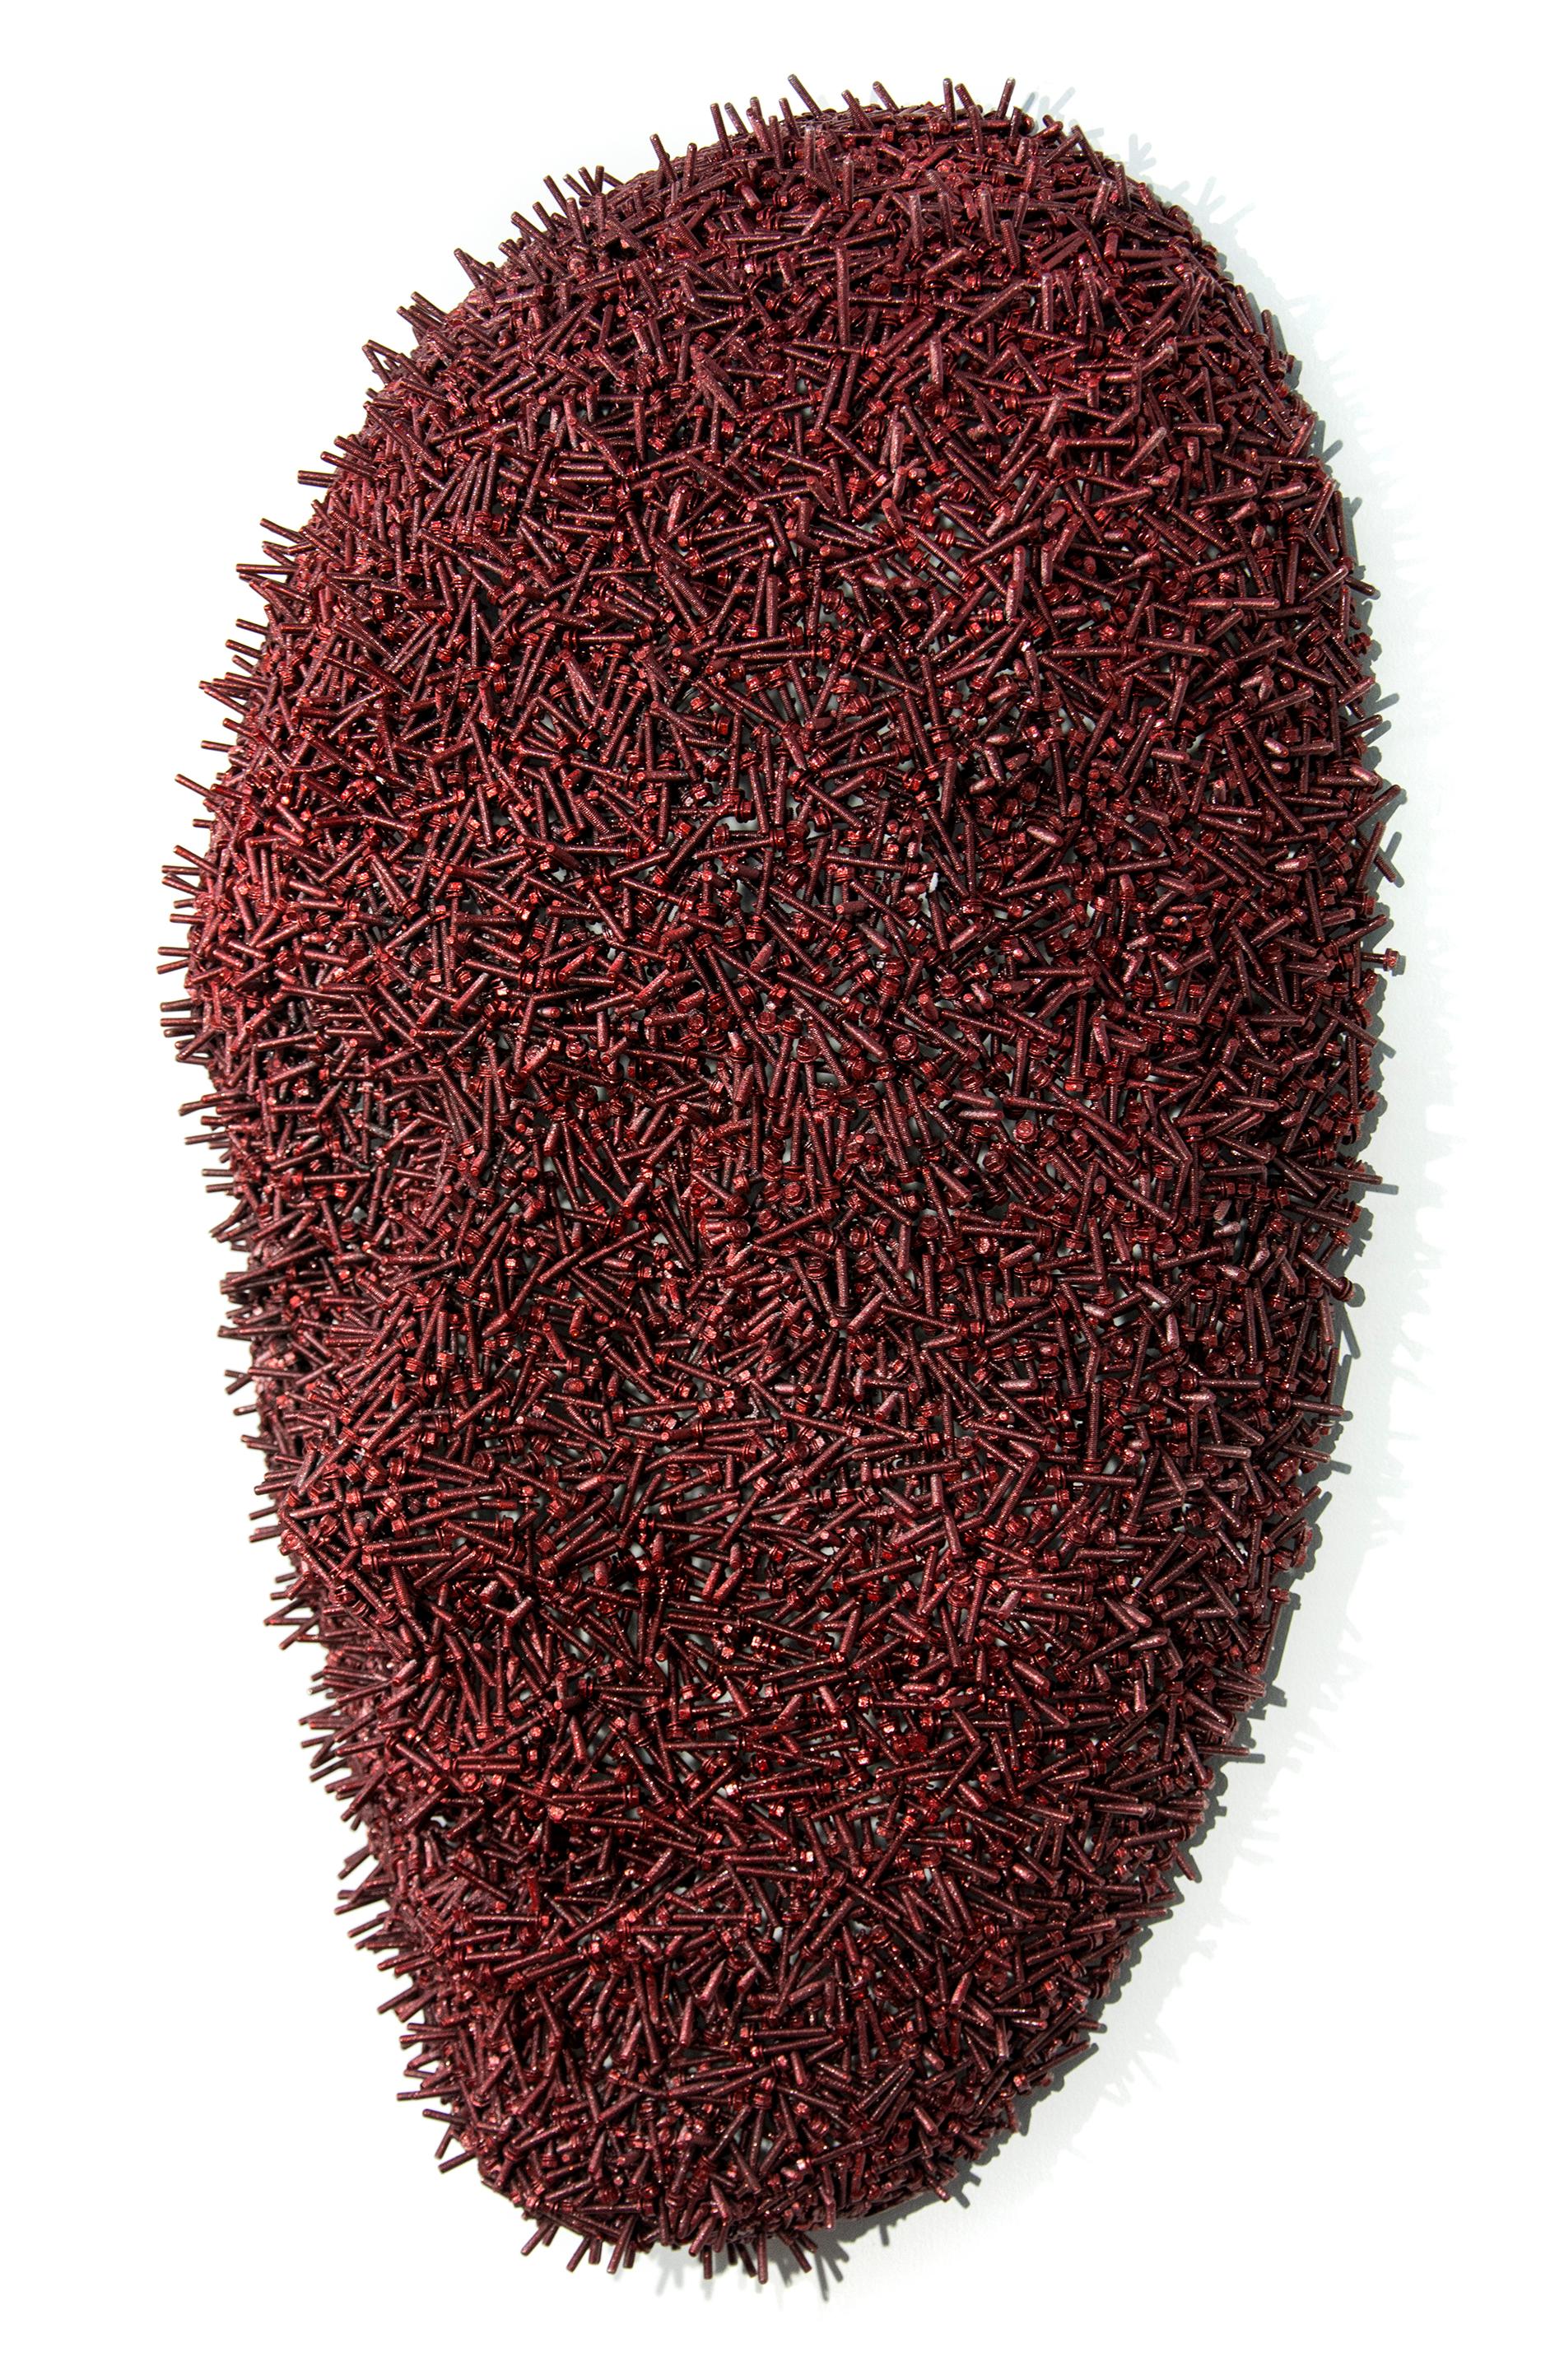 Hundreds of machine screws are pressed and welded into the shape of a large spiky mask in this haunting sculpture by Dale Dunning. The wall mounted, silent face is powder coated in a candy red that glints in the light. The title derives from the